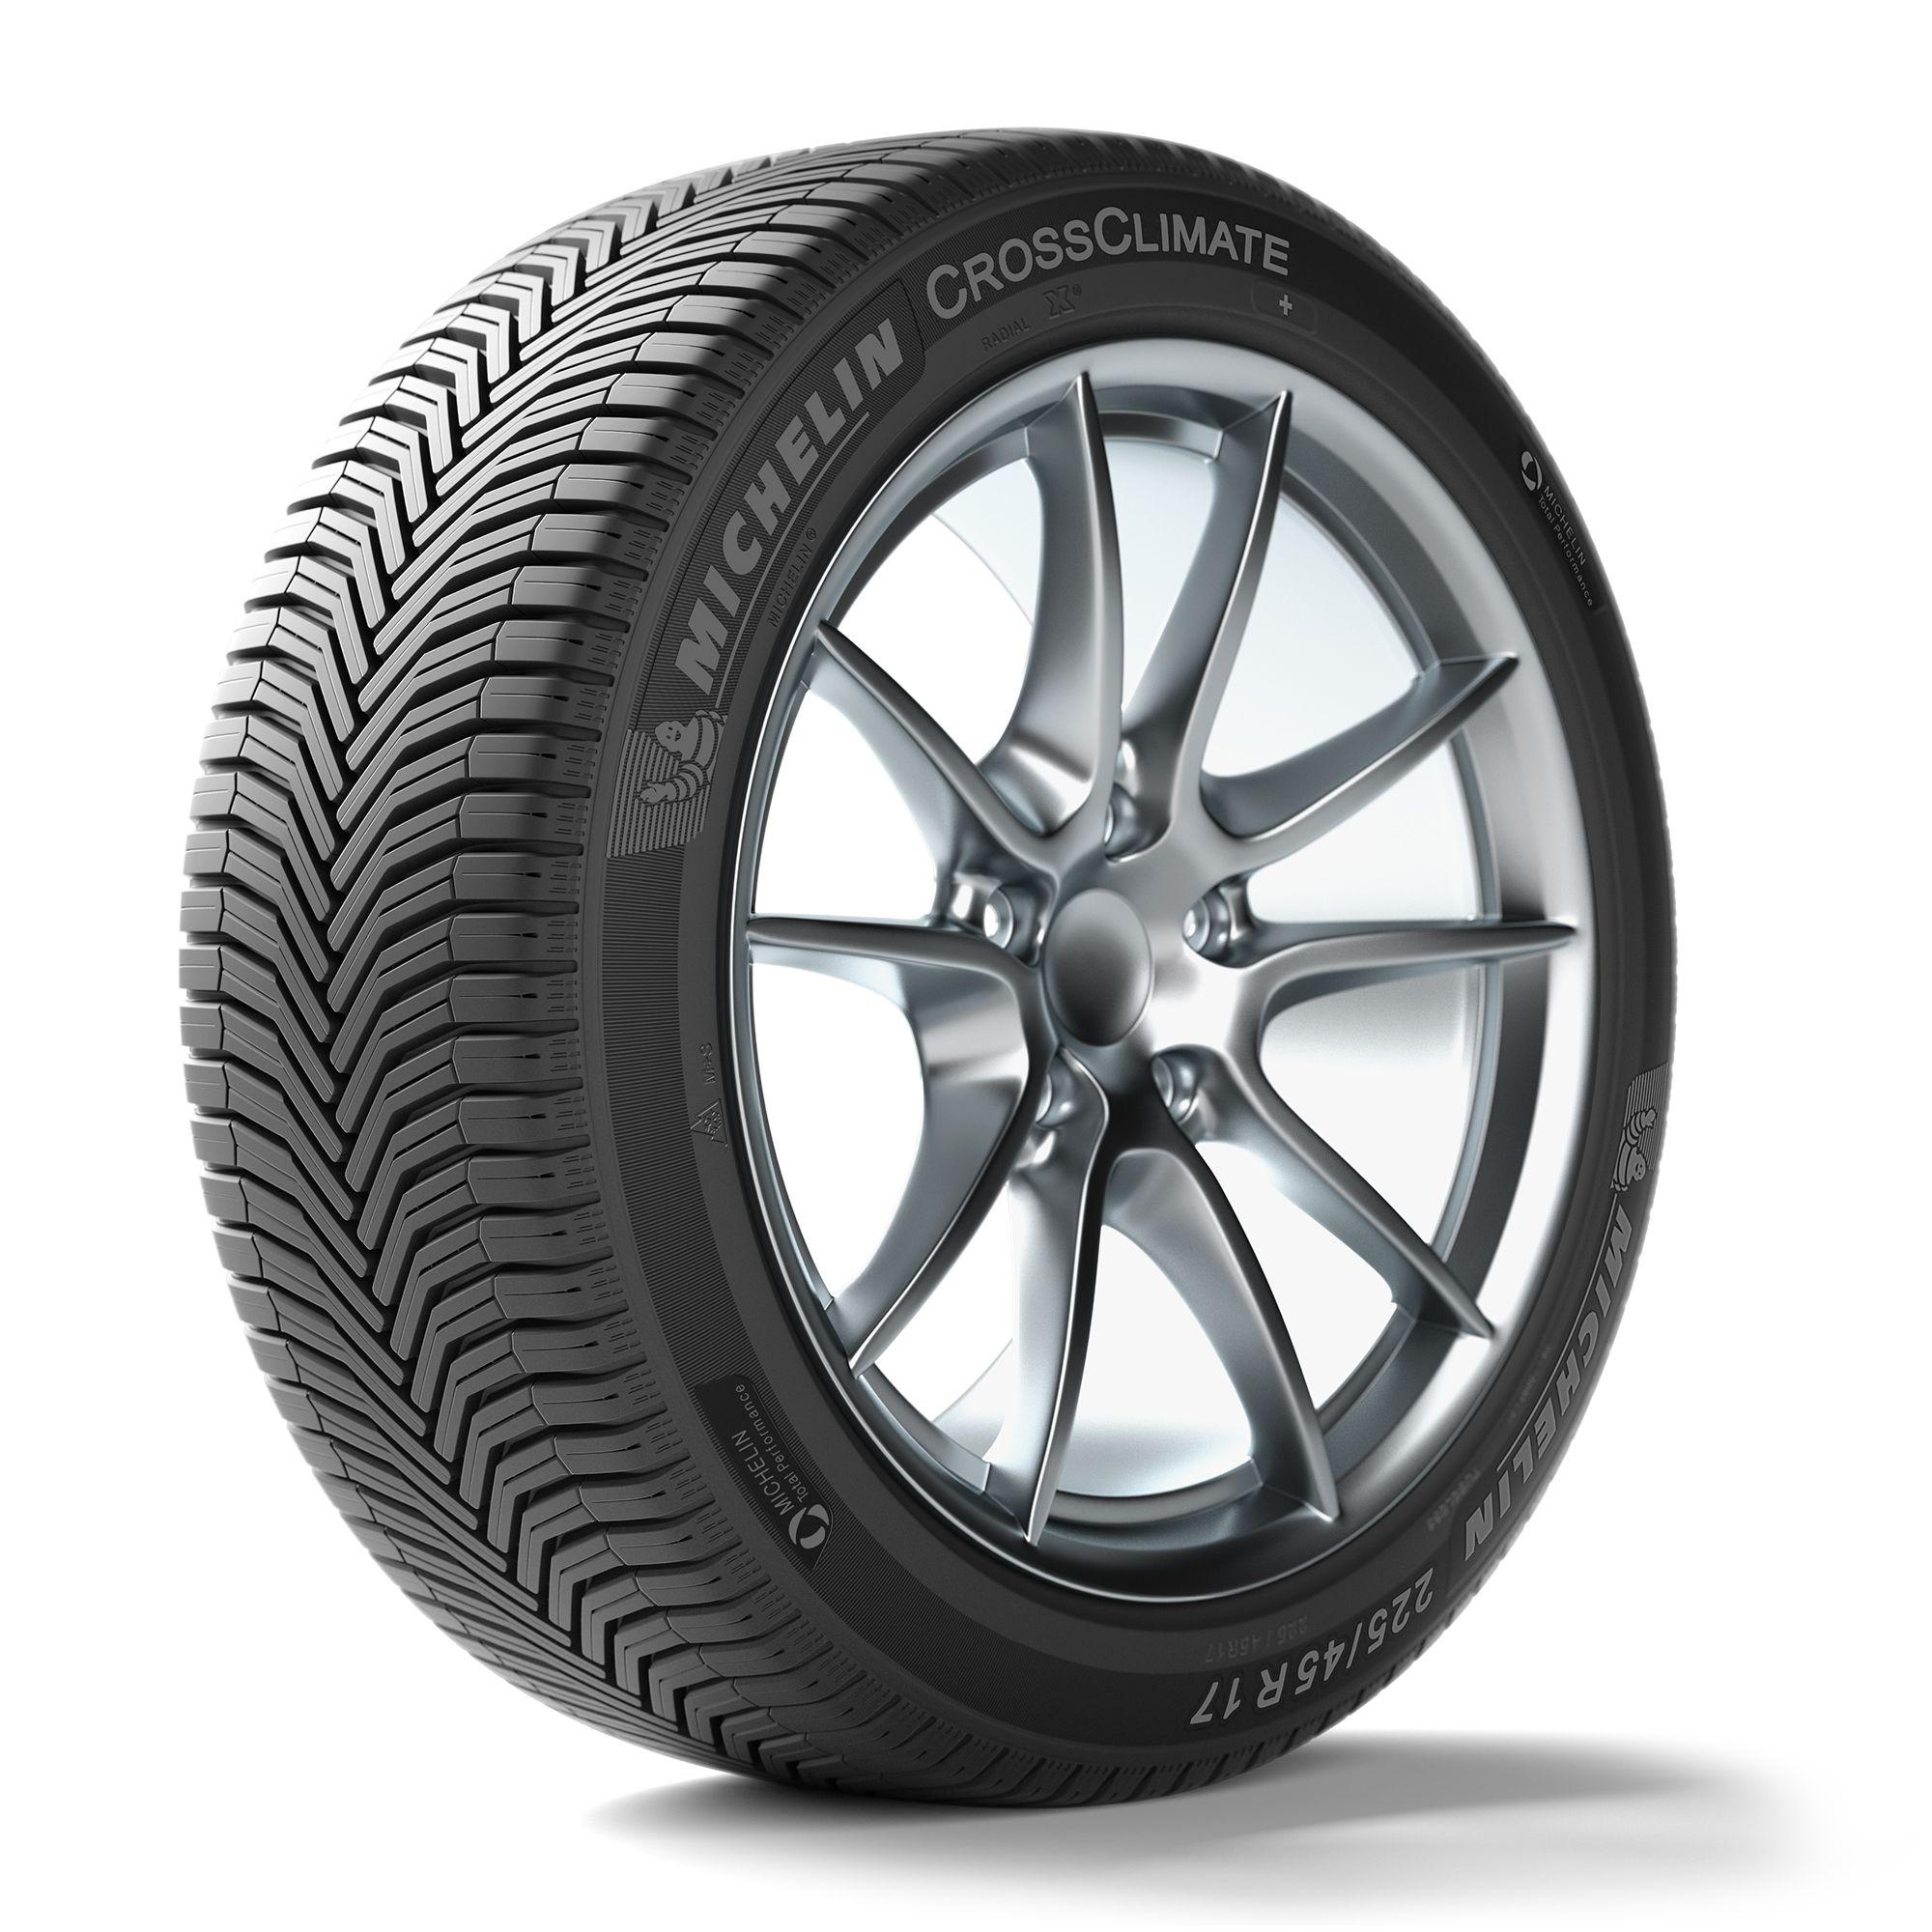 Anvelope all seasons MICHELIN CROSSCLIMATE PLUS 175/65 R14 86H